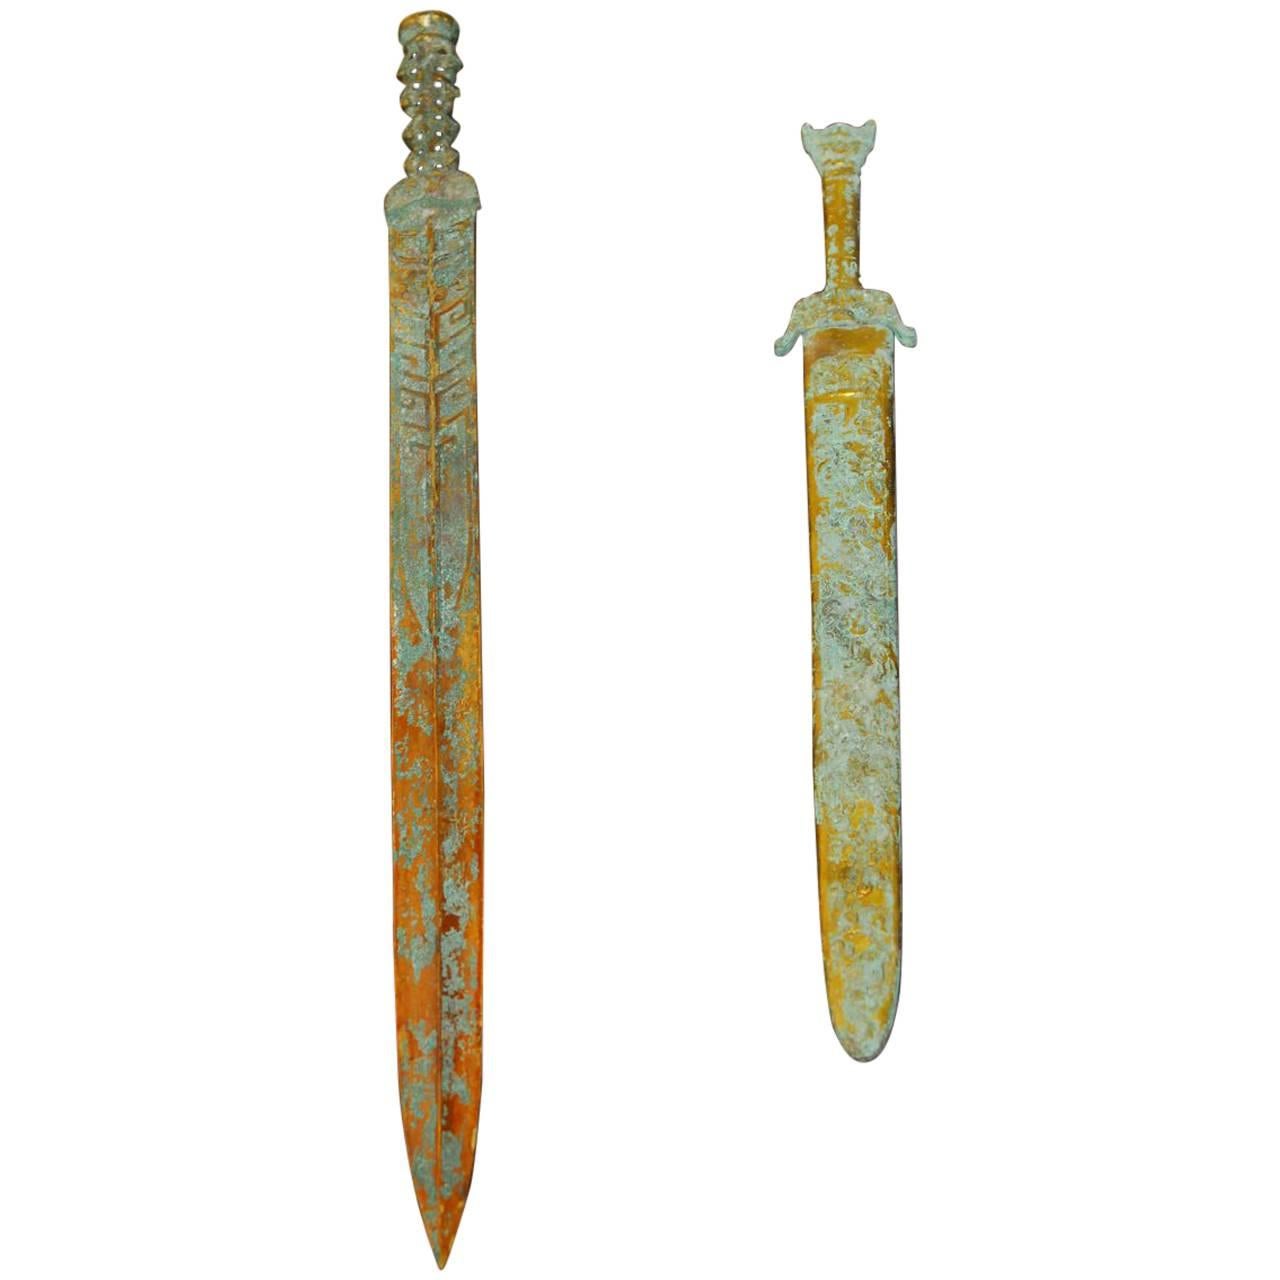 Pair of Chinese Qin Dynasty Archaic Style Brass Swords